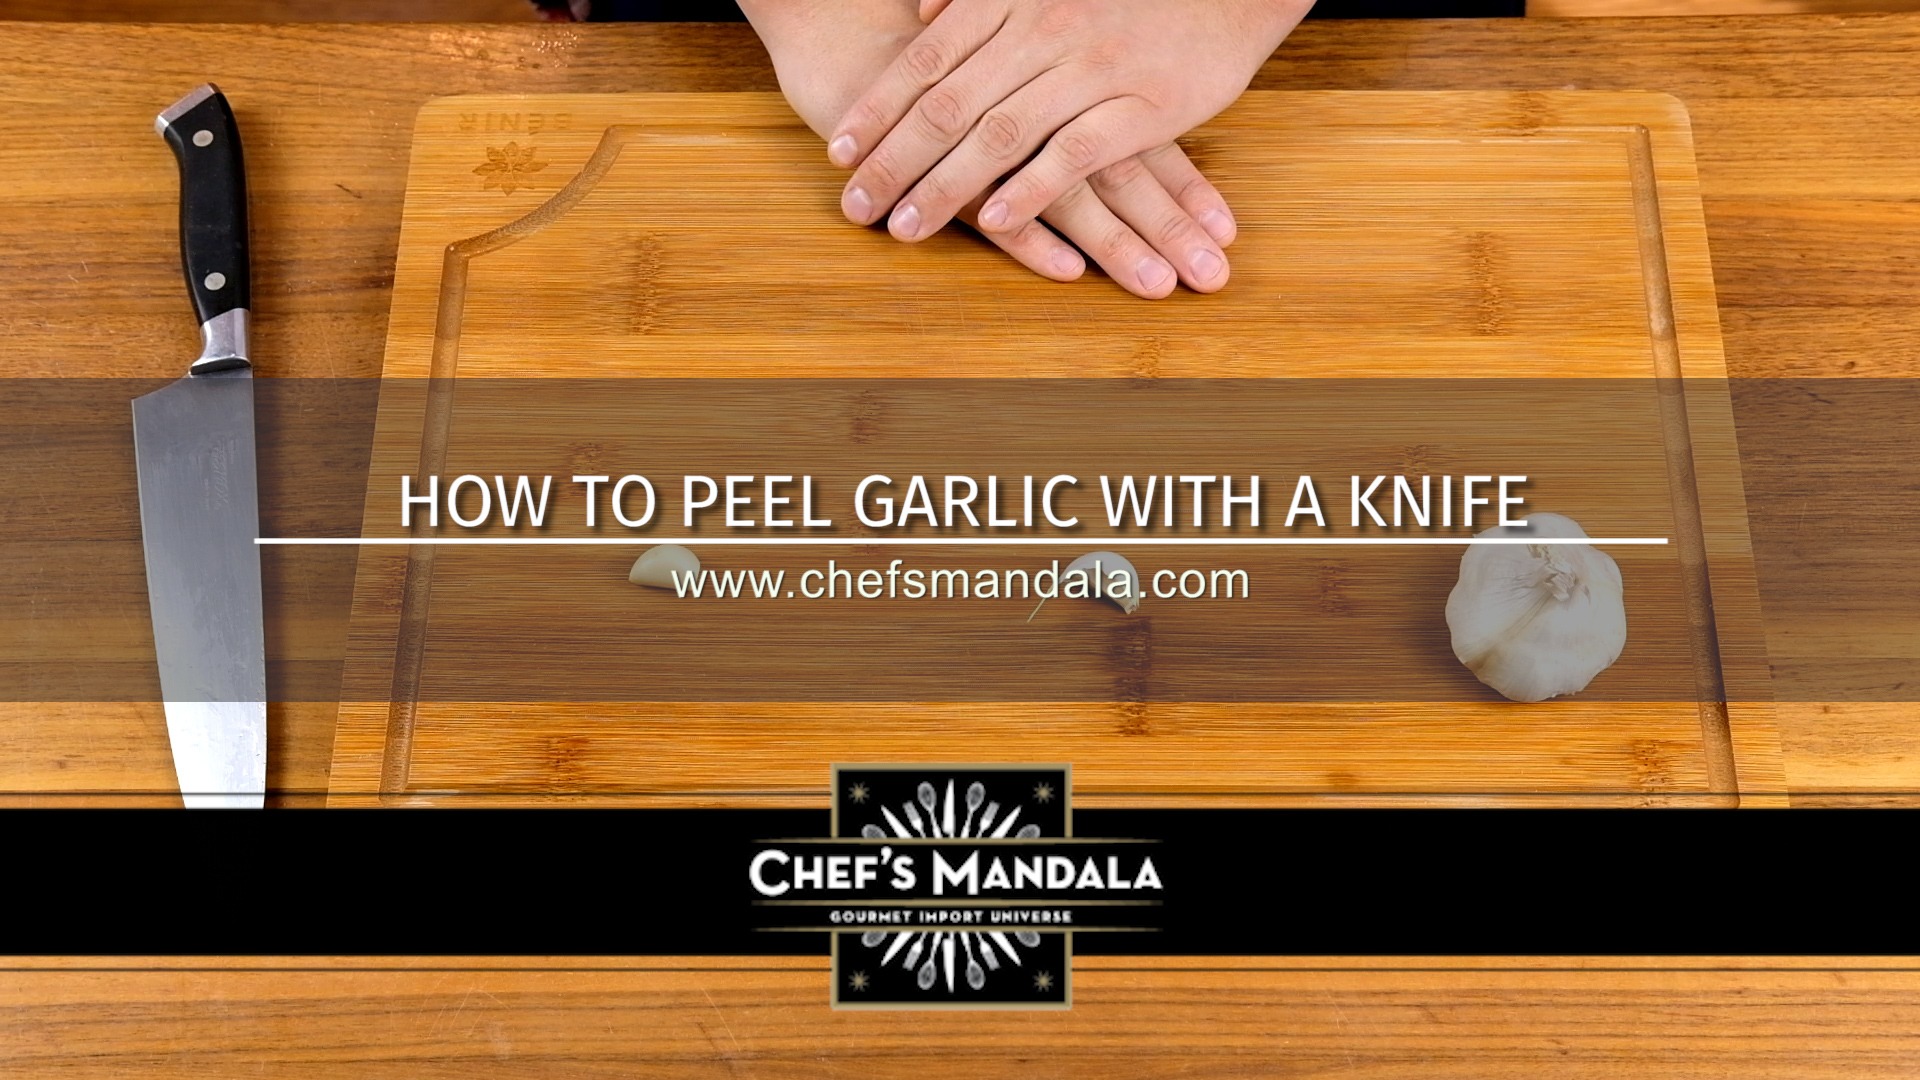 HOW TO PEEL GARLIC WITH A KNIFE